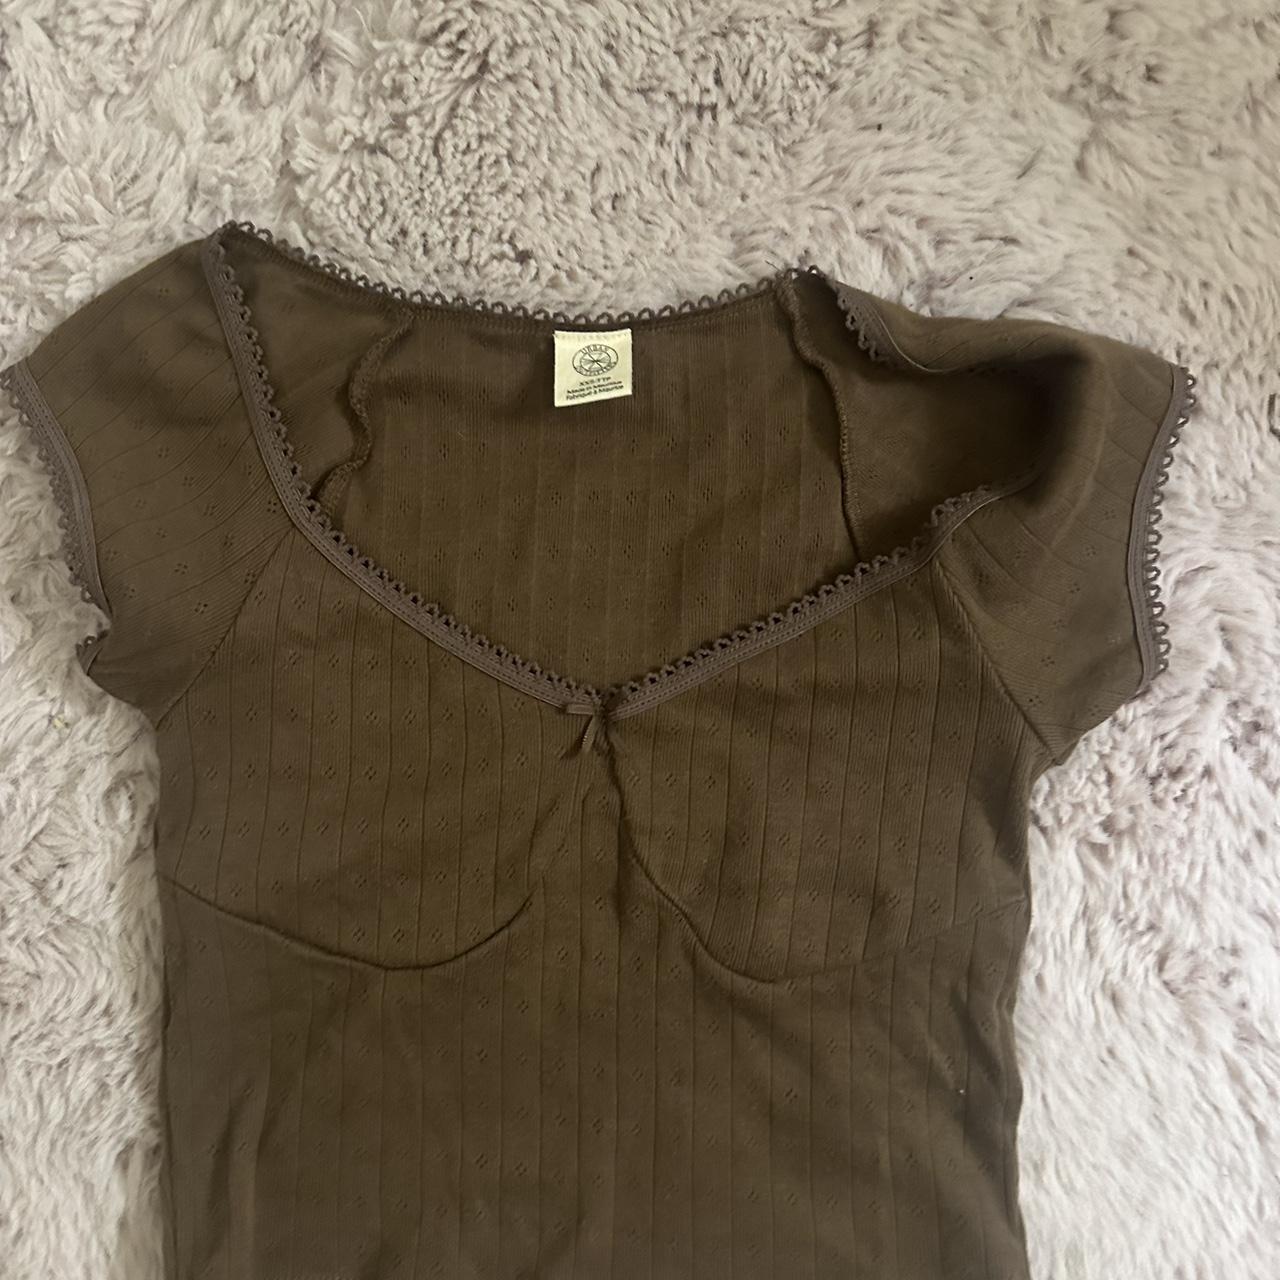 Urban Outfitters UK lacy baby tee in chocolate/brown... - Depop